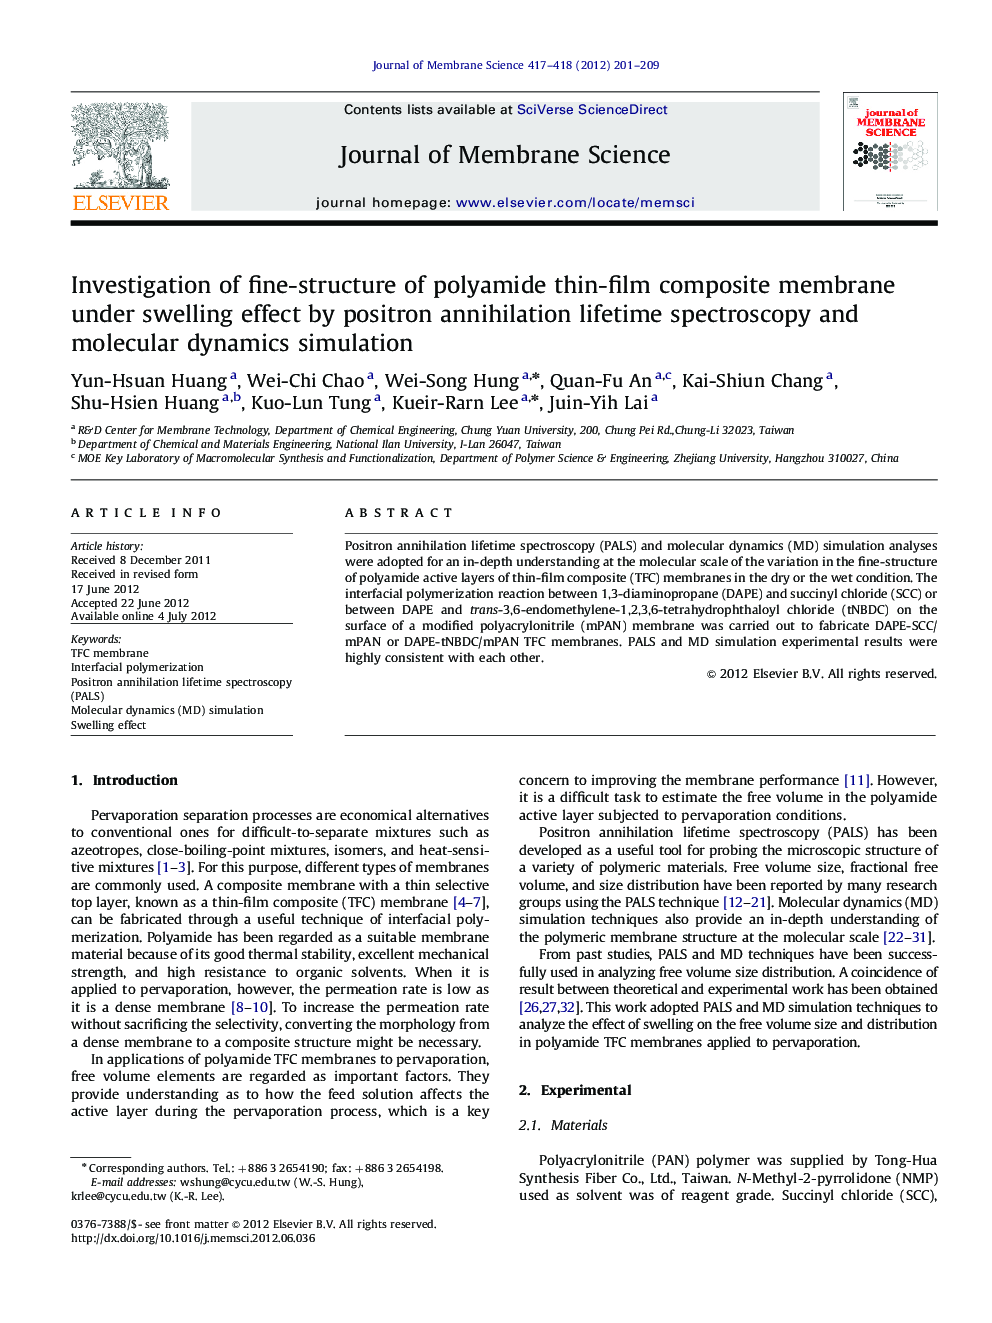 Investigation of fine-structure of polyamide thin-film composite membrane under swelling effect by positron annihilation lifetime spectroscopy and molecular dynamics simulation